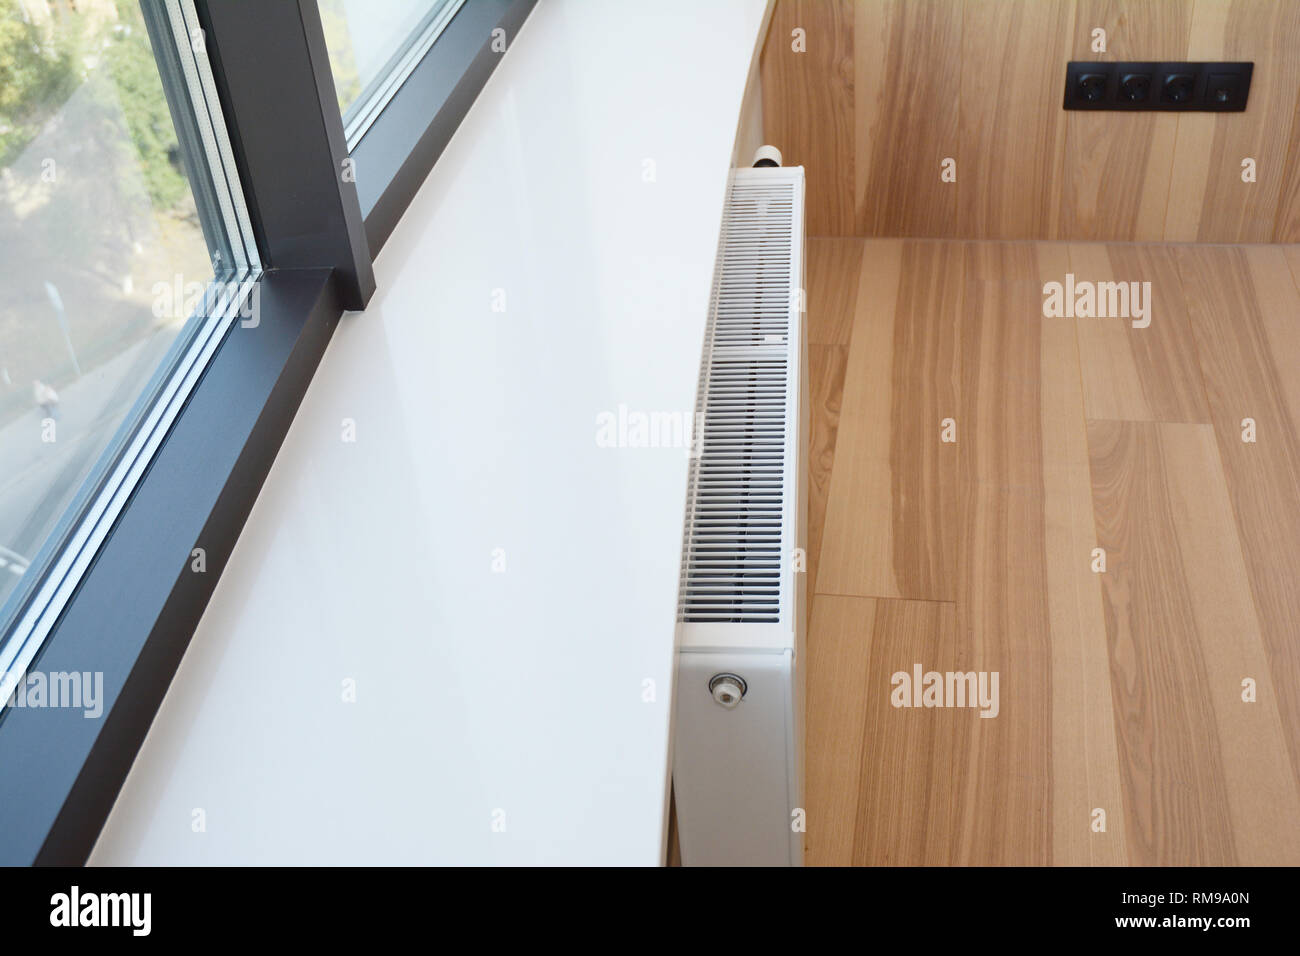 White radiator heating with thermostat and window sill. Stock Photo